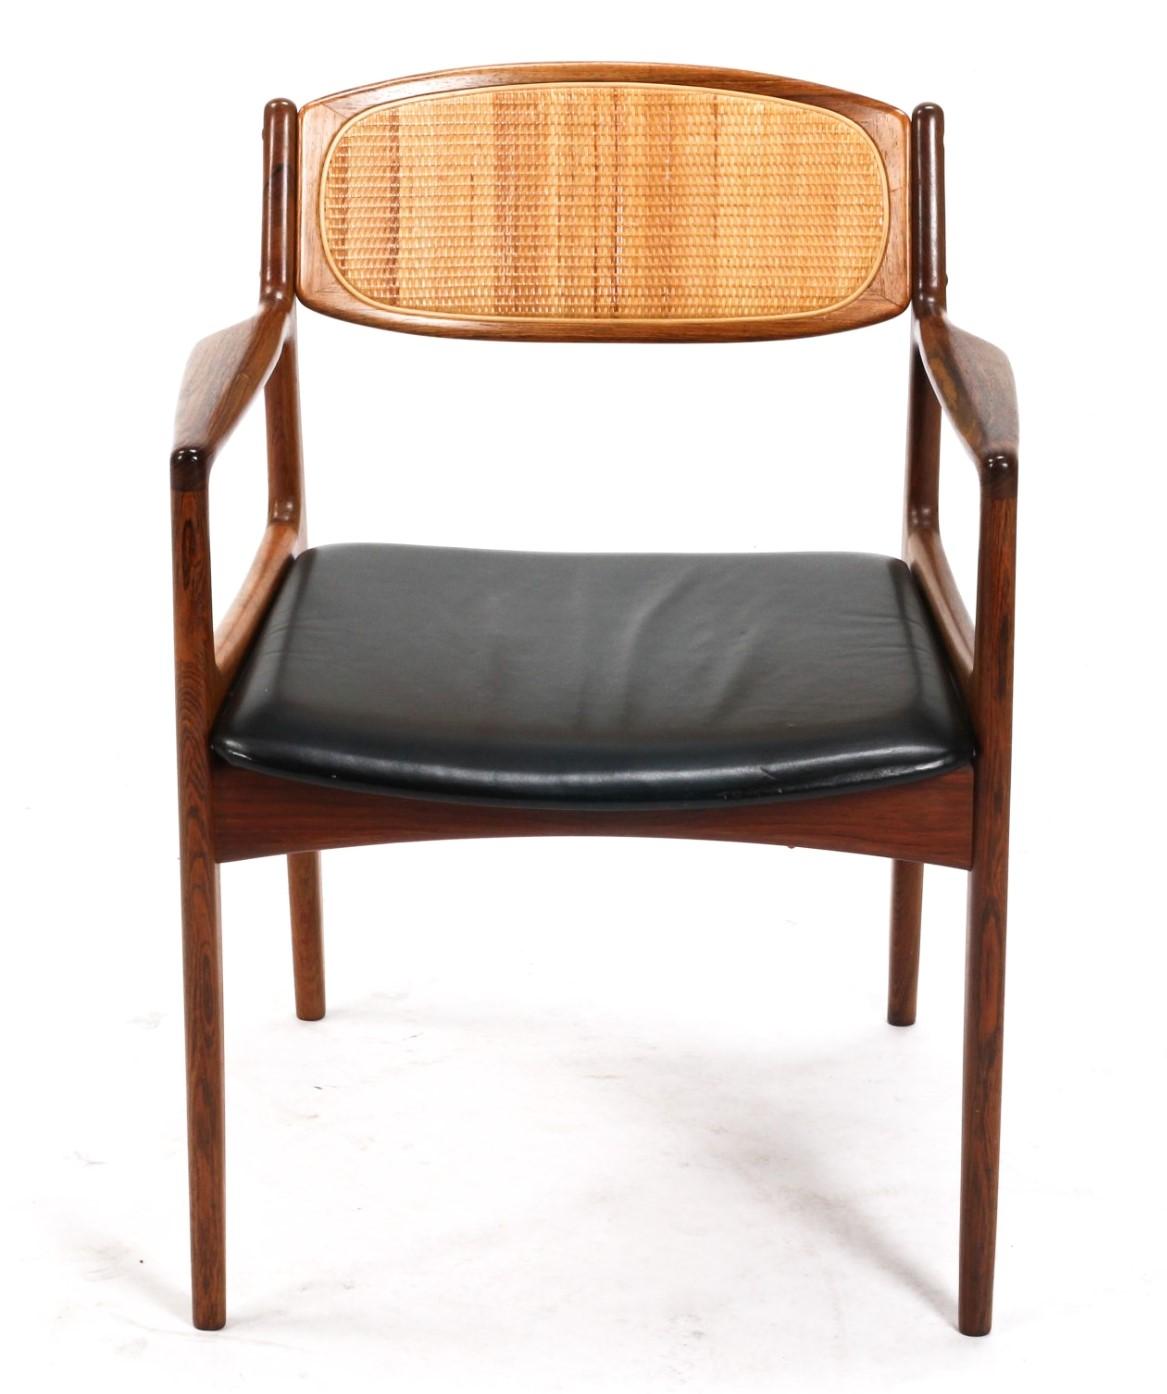 A rare Kofod Larsen armchair in solid rosewood with a very nice contrast of the caned backrest and the leather seat. This comfortable office chair was designed by the designer in the 1960s and has the essence of form and function of Scandinavian